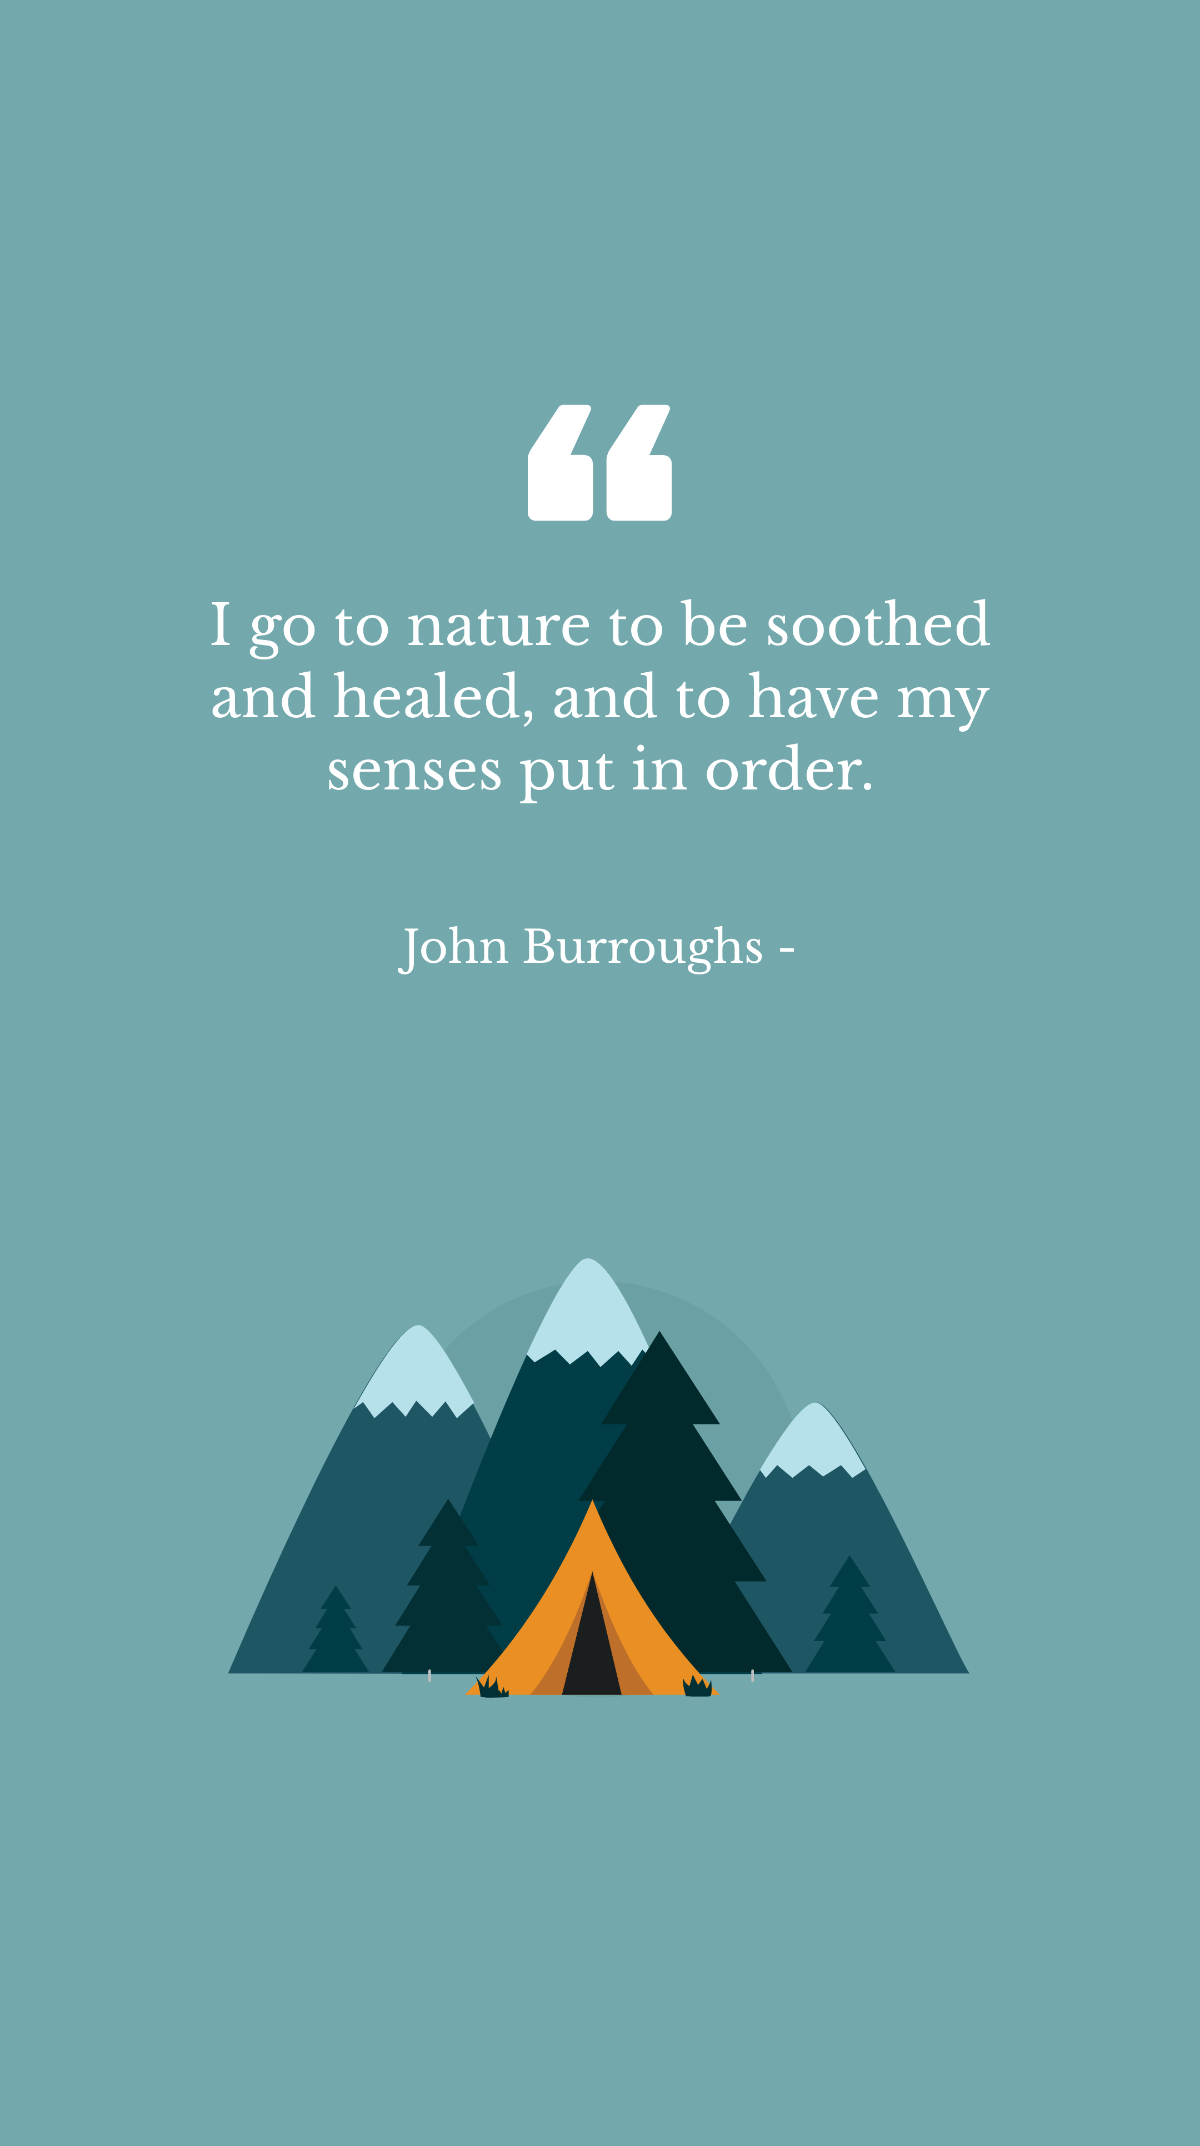 John Burroughs - I go to nature to be soothed and healed, and to have my senses put in order. Template